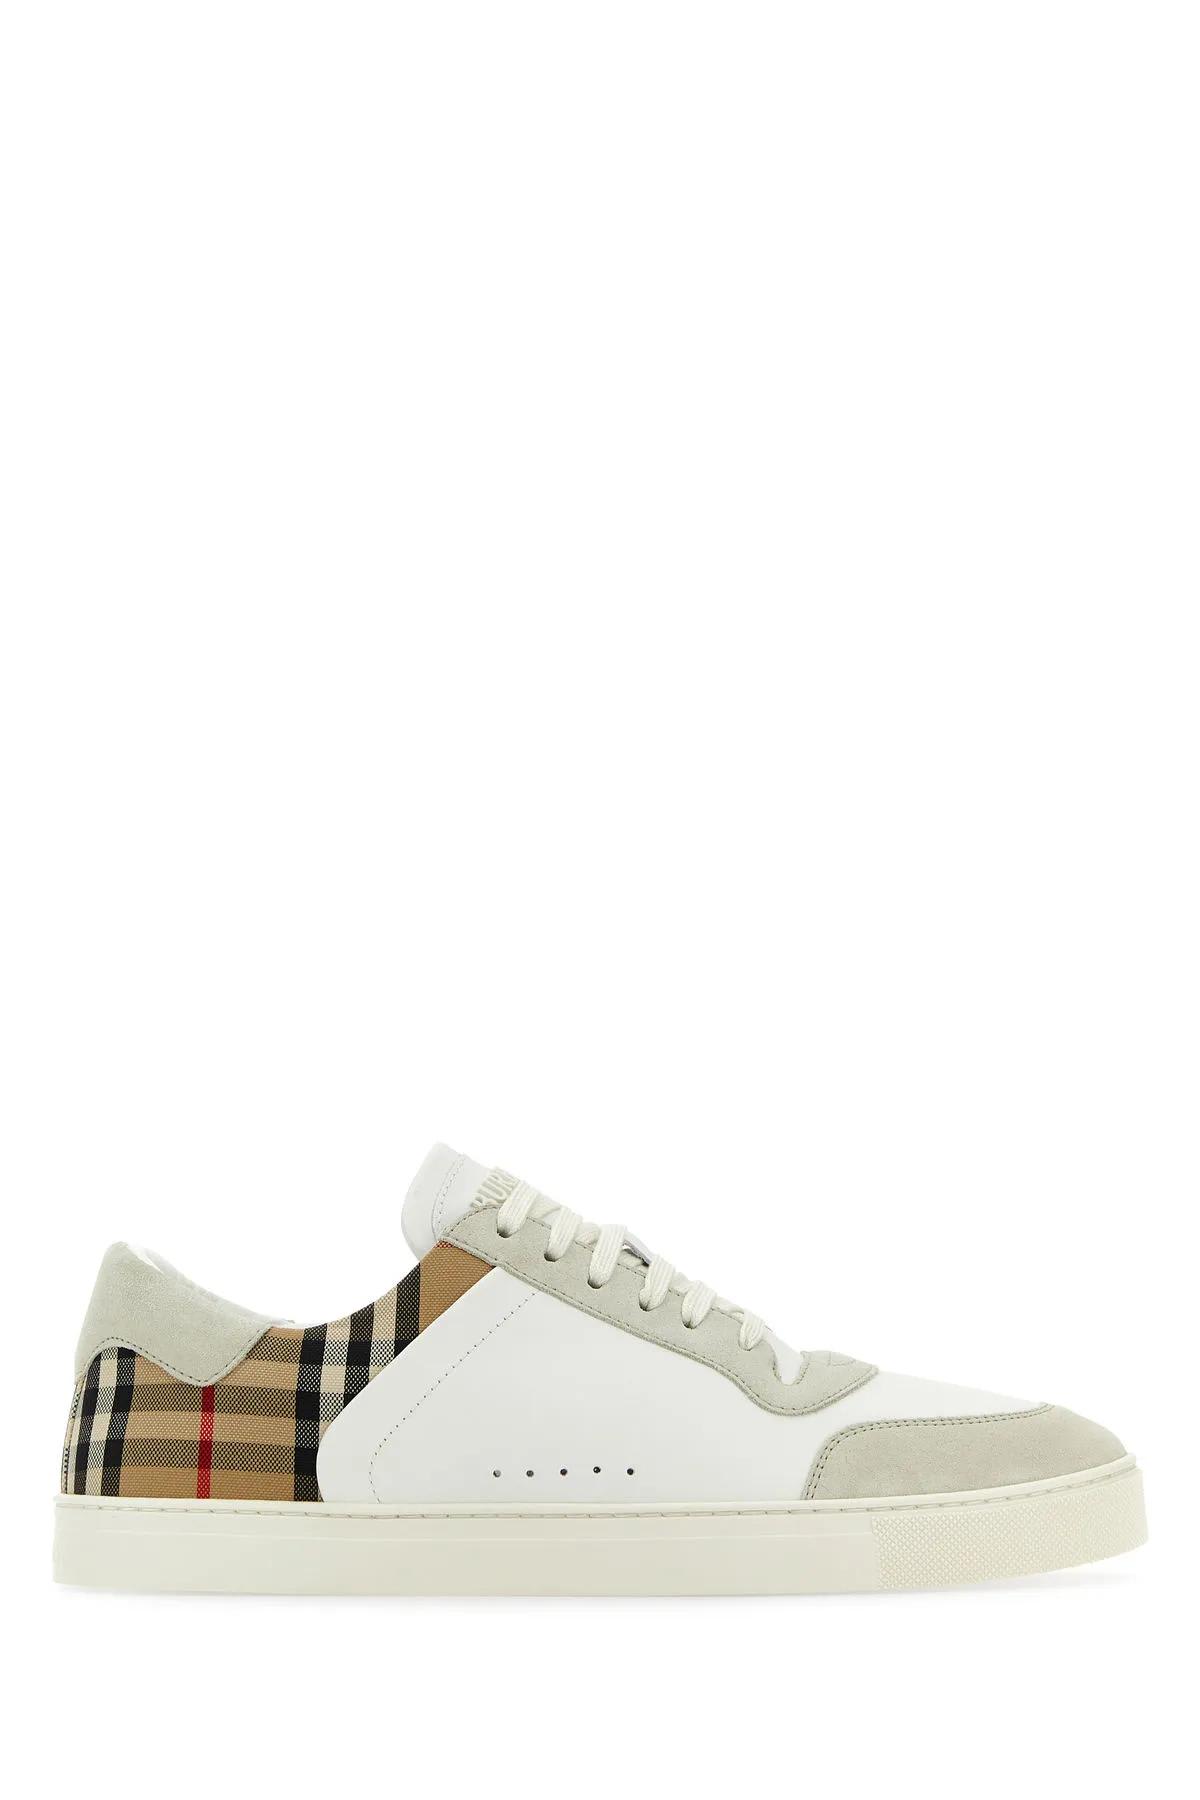 Shop Burberry Multicolor Suede And Leather Sneakers In White